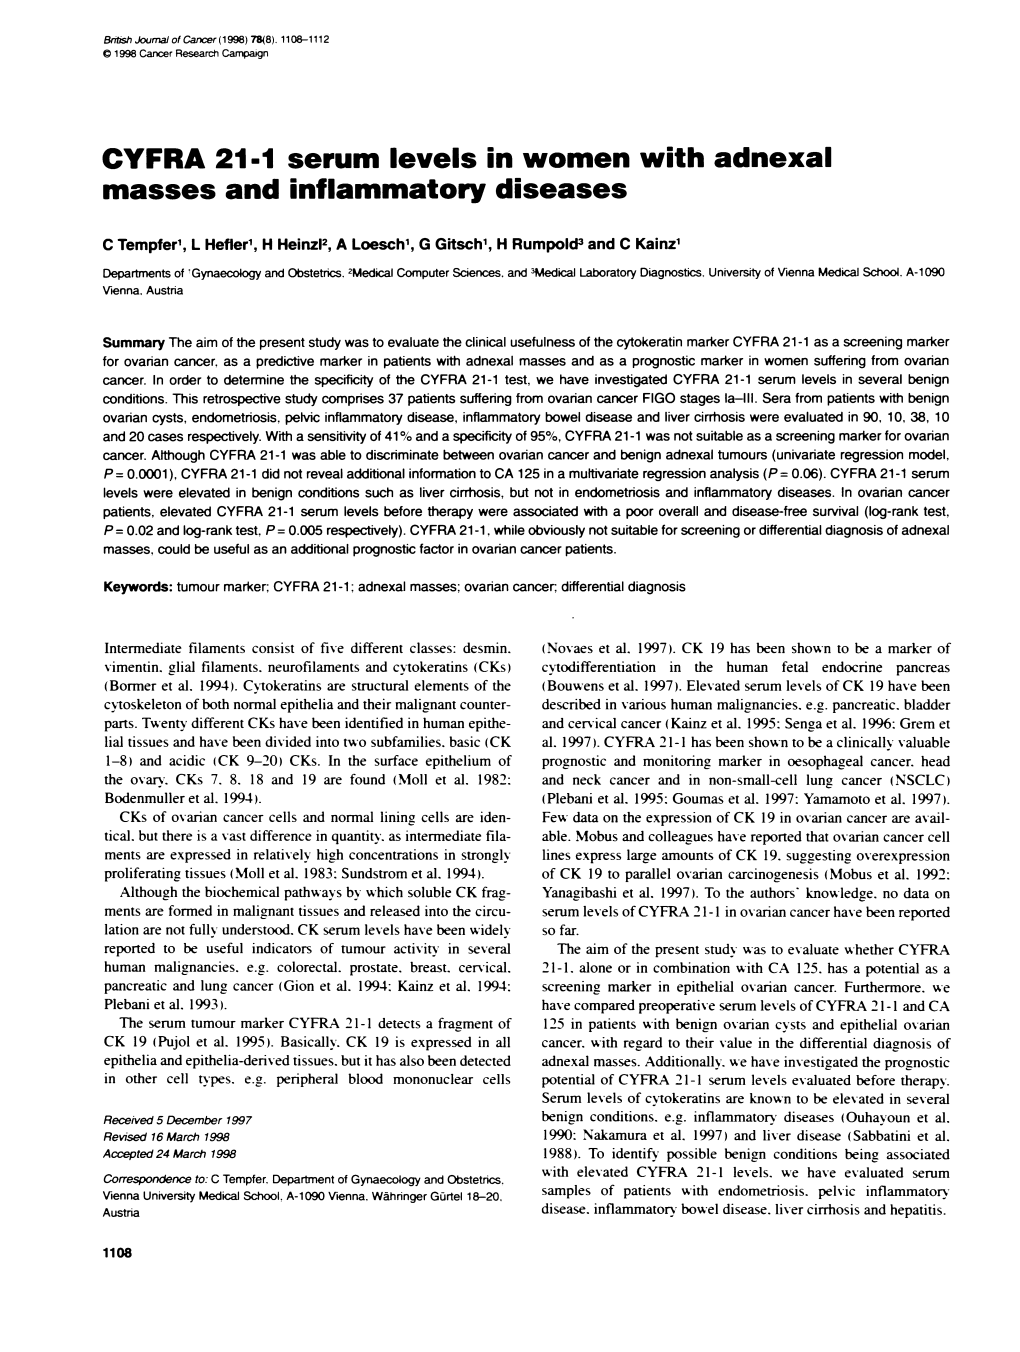 Masses and Inflammatory Diseases